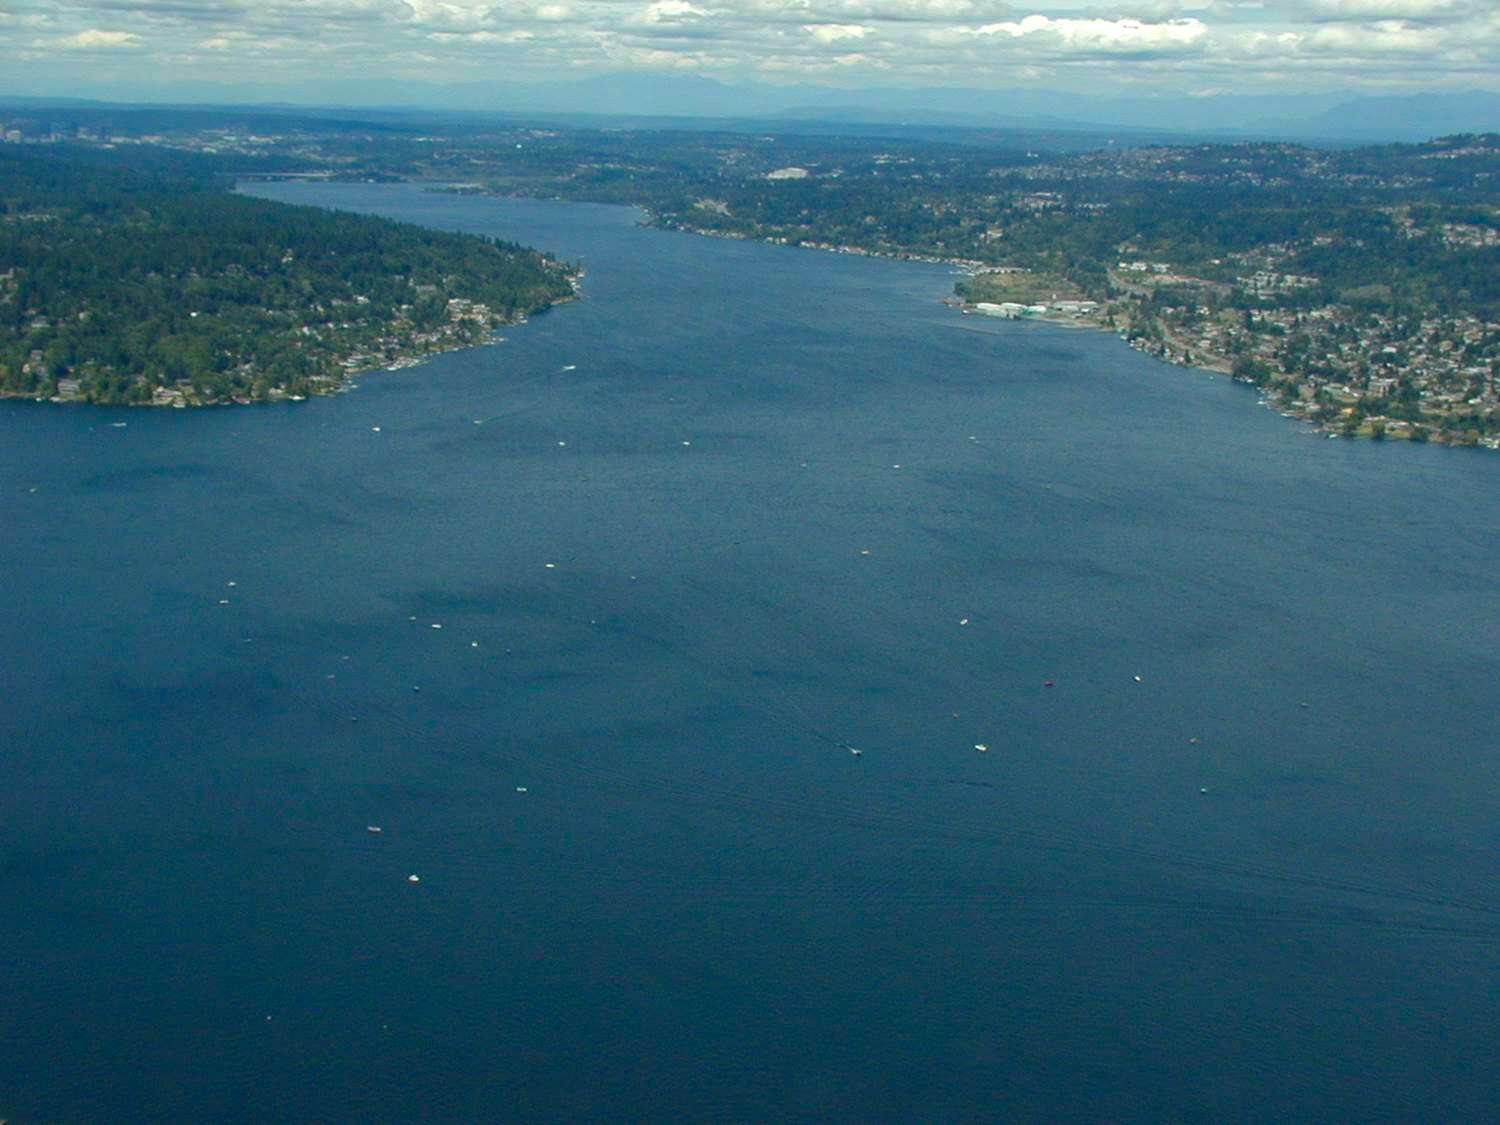 <h4>18. Lake Washington, Washington </h4>[21,934 acres] <br>This glacially-created lake is unique, with inlets at both ends and a central man-made outlet. Itâs characterized by steep, highly urbanized banks with thousands of docks. The Washington Department of Fish and Wildlifeâs Warmwater Program studies indicate that largemouth numbers are down, while smallmouth are up. Angler surveys are consistent, revealing smallies as the preferred target. Both, however, get sizable. A 7.01 largemouth and a 5.76 smallmouth were big fish at a Washington Bass Association event in March.